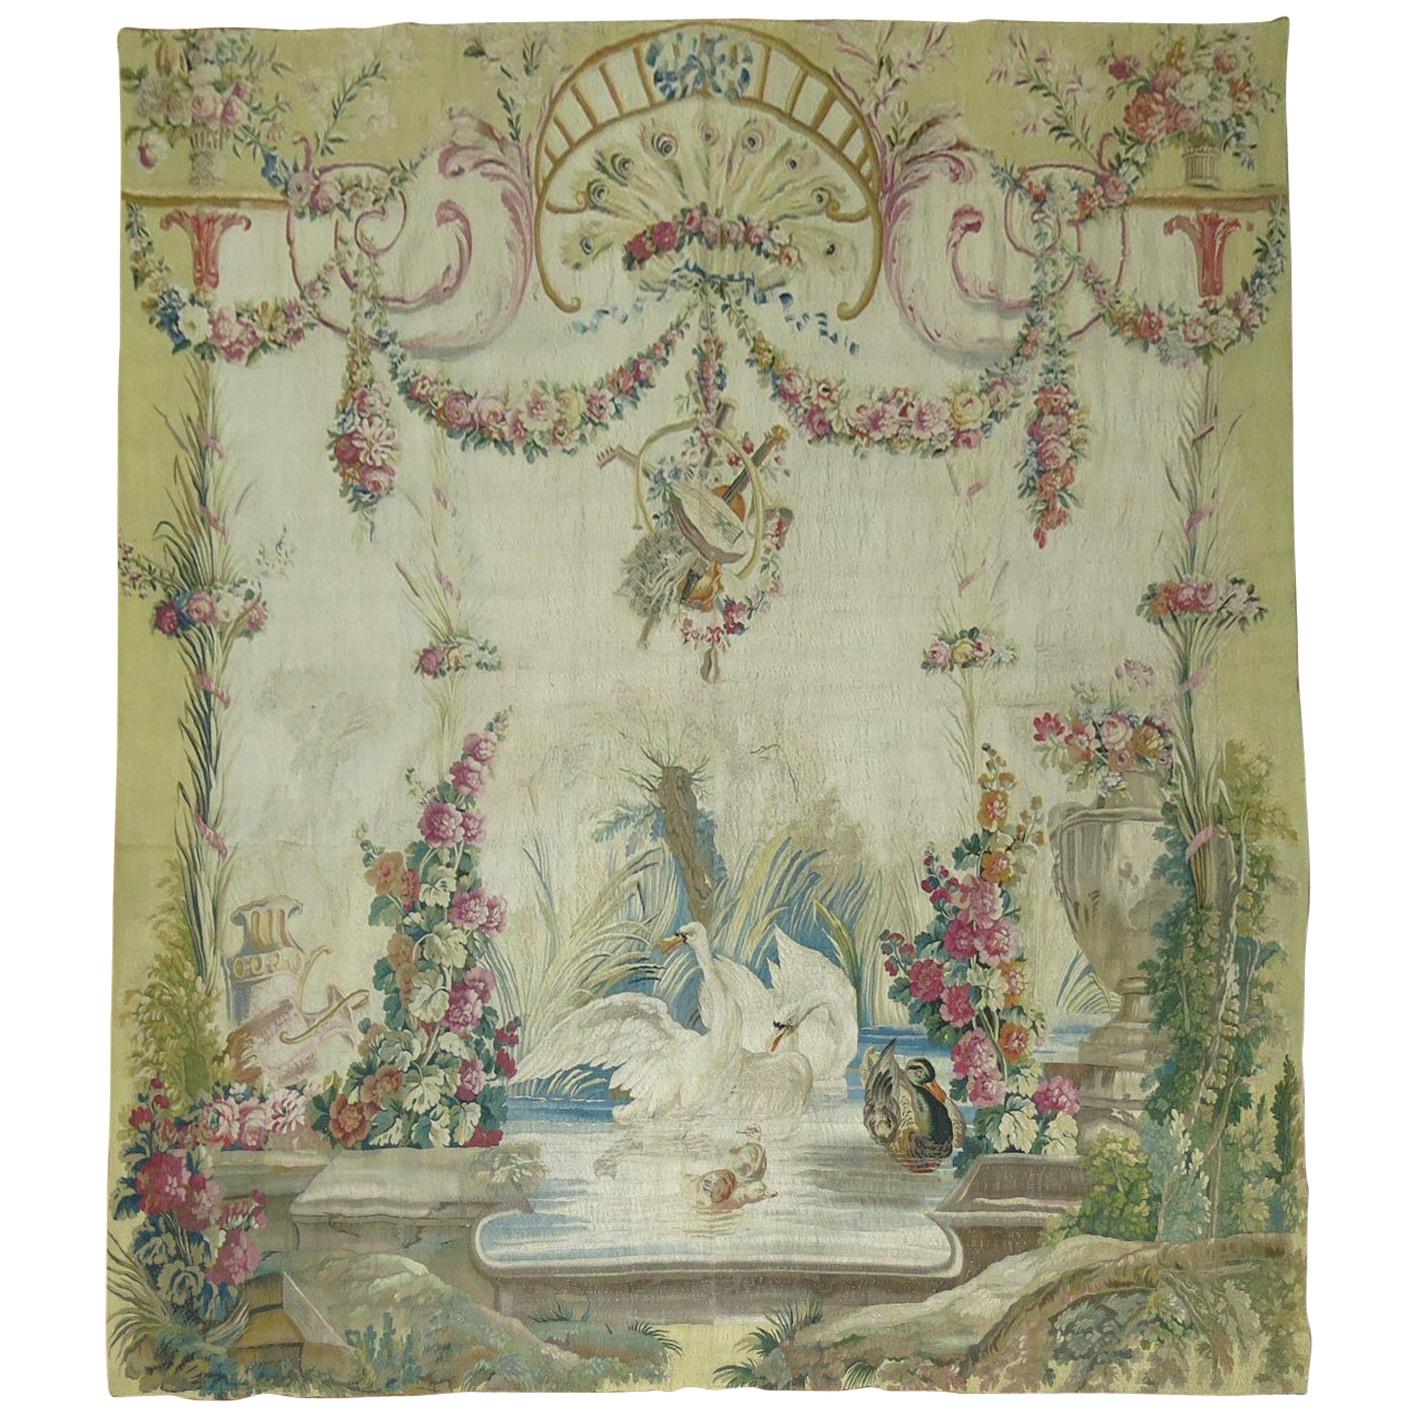 Swans Ducks 18th Century Aubusson French Tapestry Panel